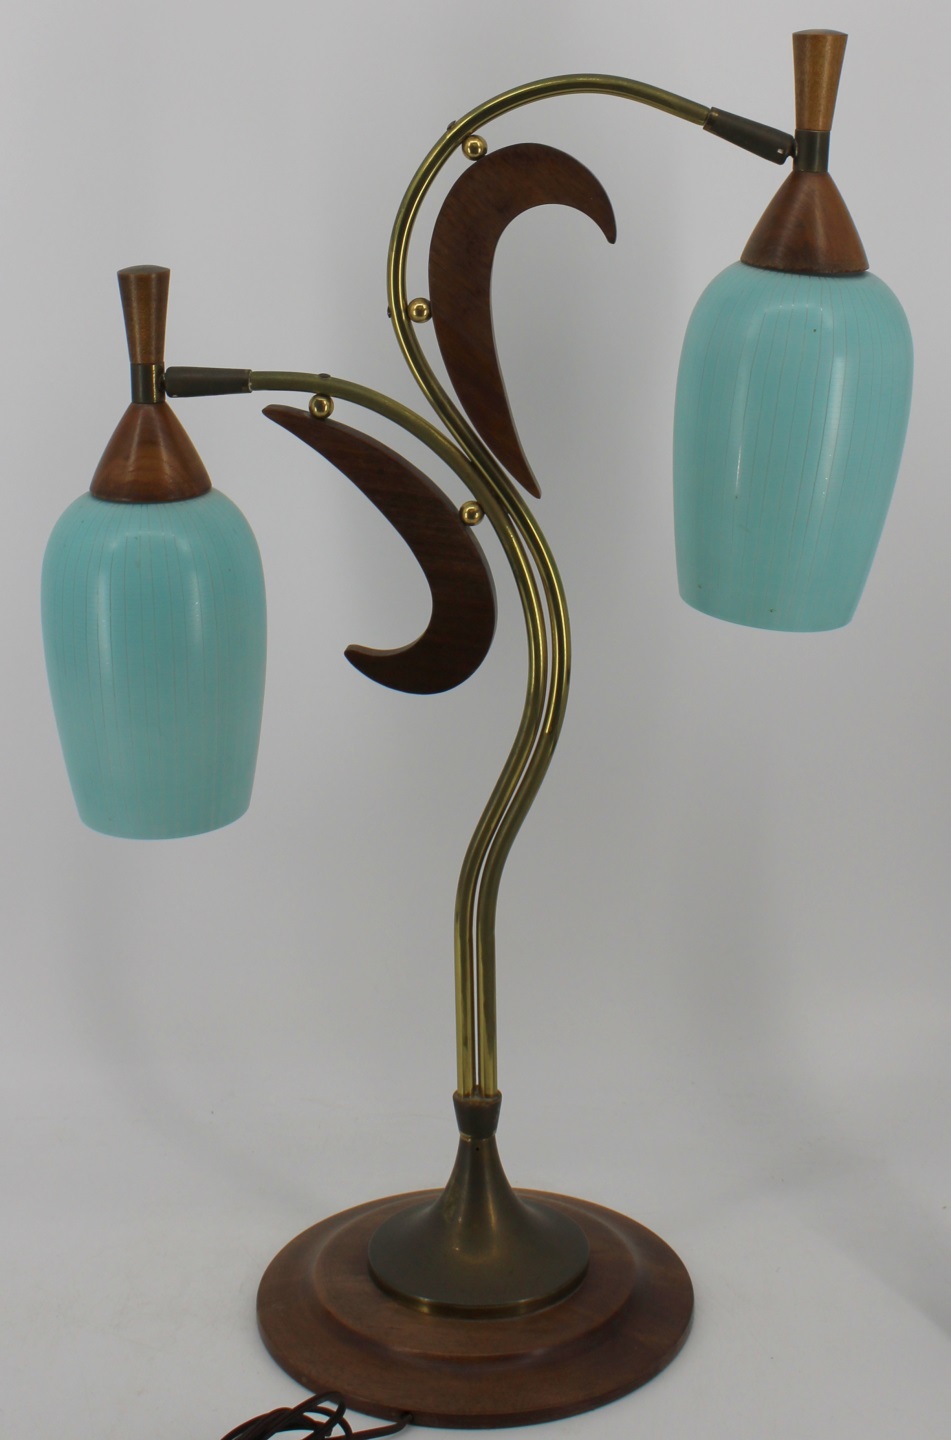 MIDCENTURY TABLE LAMP WITH ART 3bd6d1